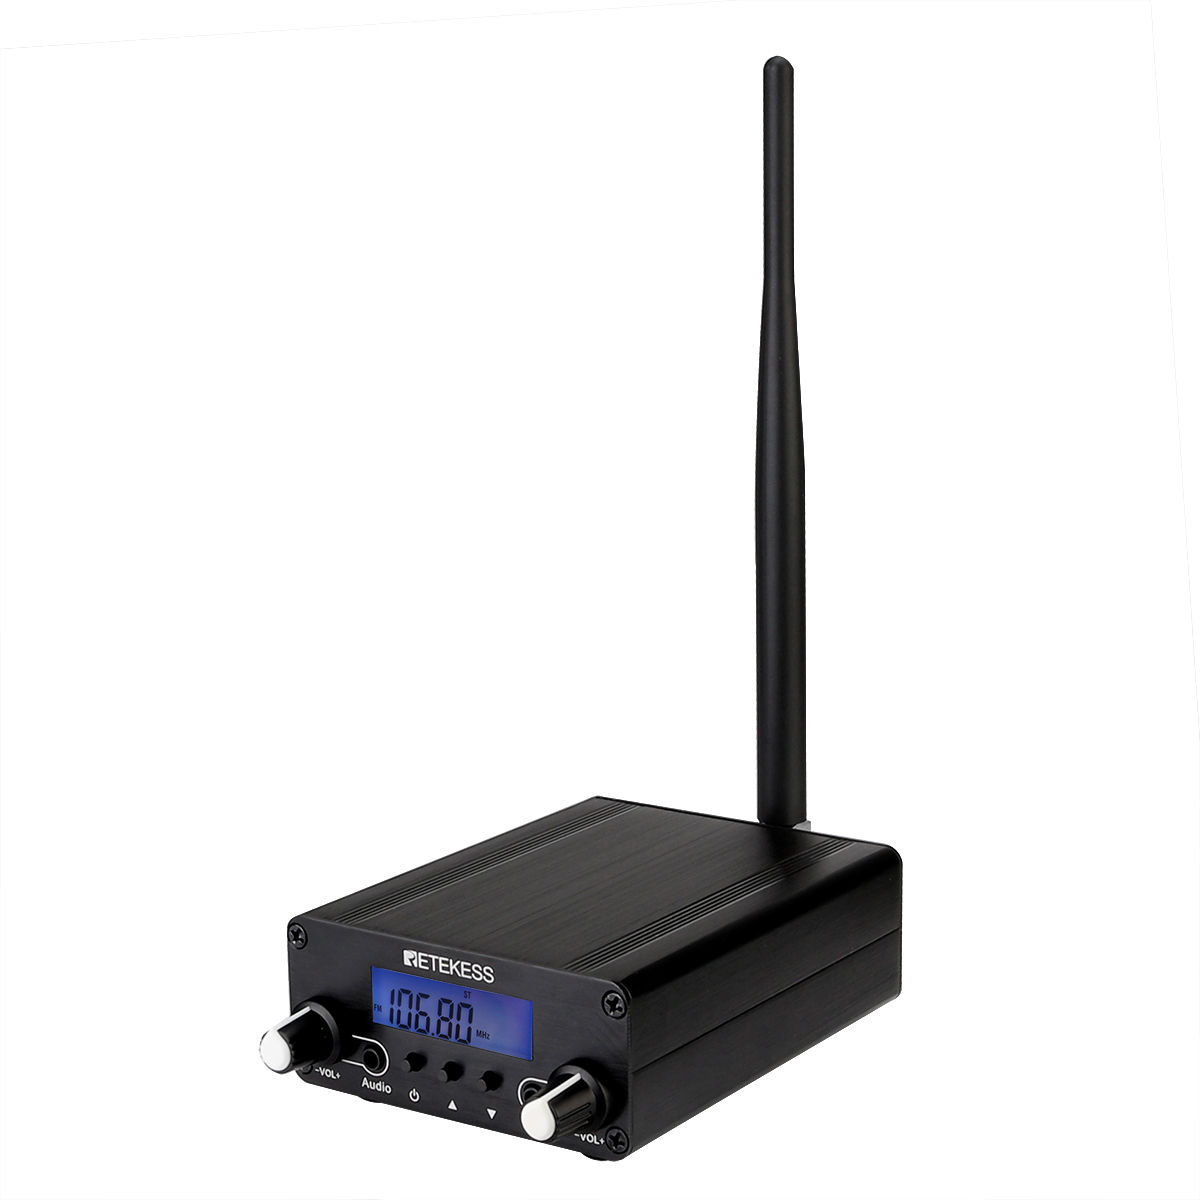 Find Retekess TR508 FM Transmitter For Drive in Church FM Transmitter Wireless Broadcast Stereo Station Long Range Transmitter Drive in Cinemas for Sale on Gipsybee.com with cryptocurrencies